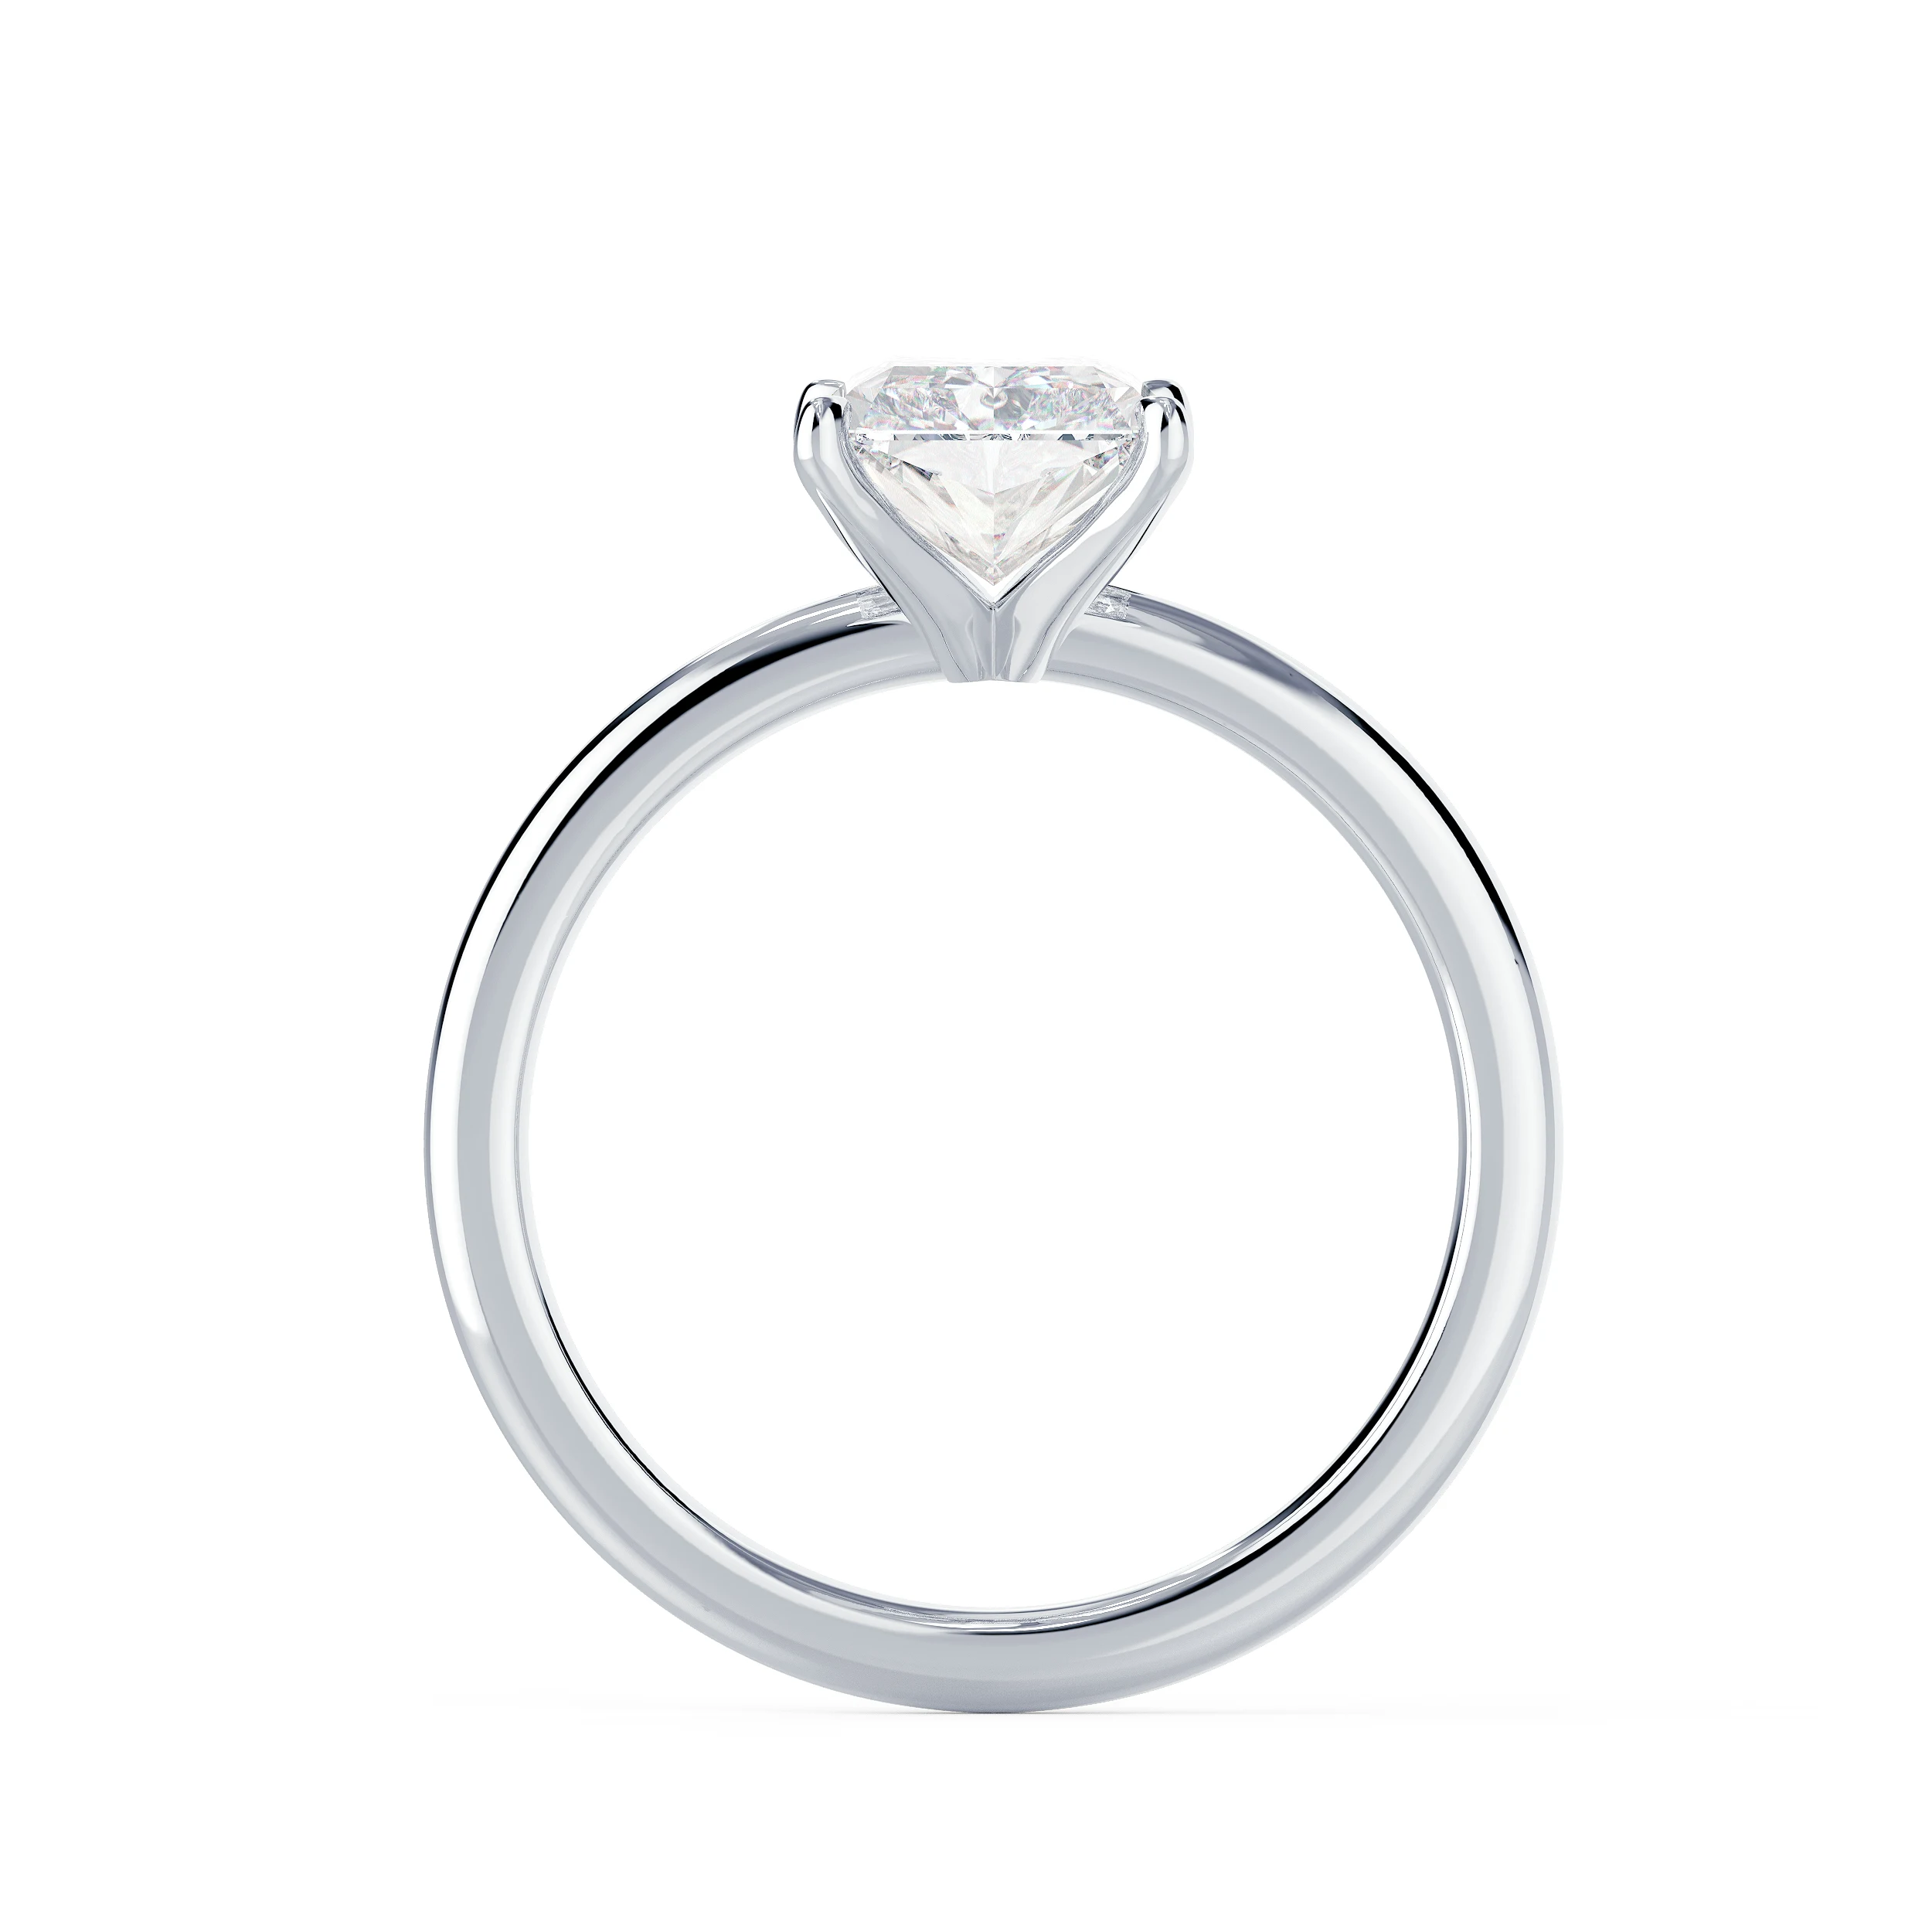 White Gold Radiant Classic Four Prong Solitaire Diamond Engagement Ring featuring Lab Created Diamonds (Profile View)